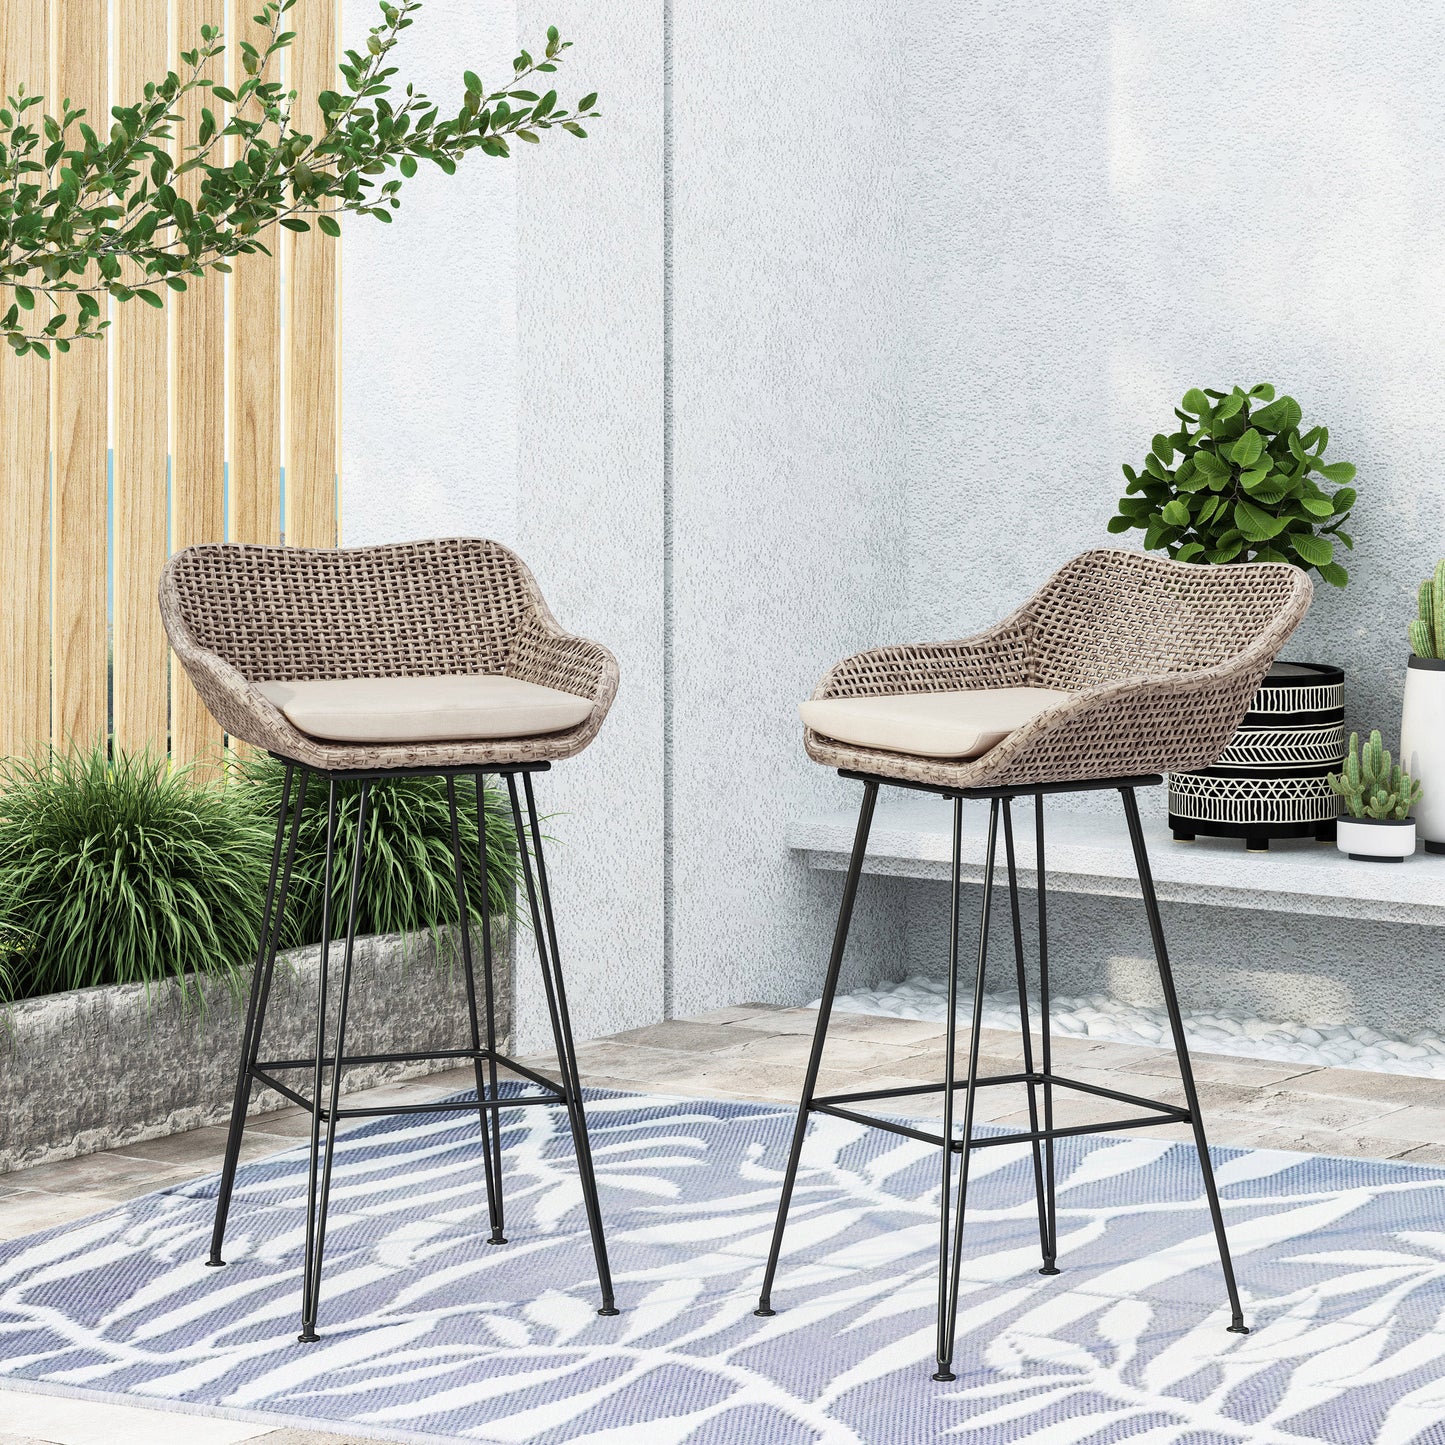 Pondway Outdoor Wicker and Iron Barstools with Cushion, Set of 2